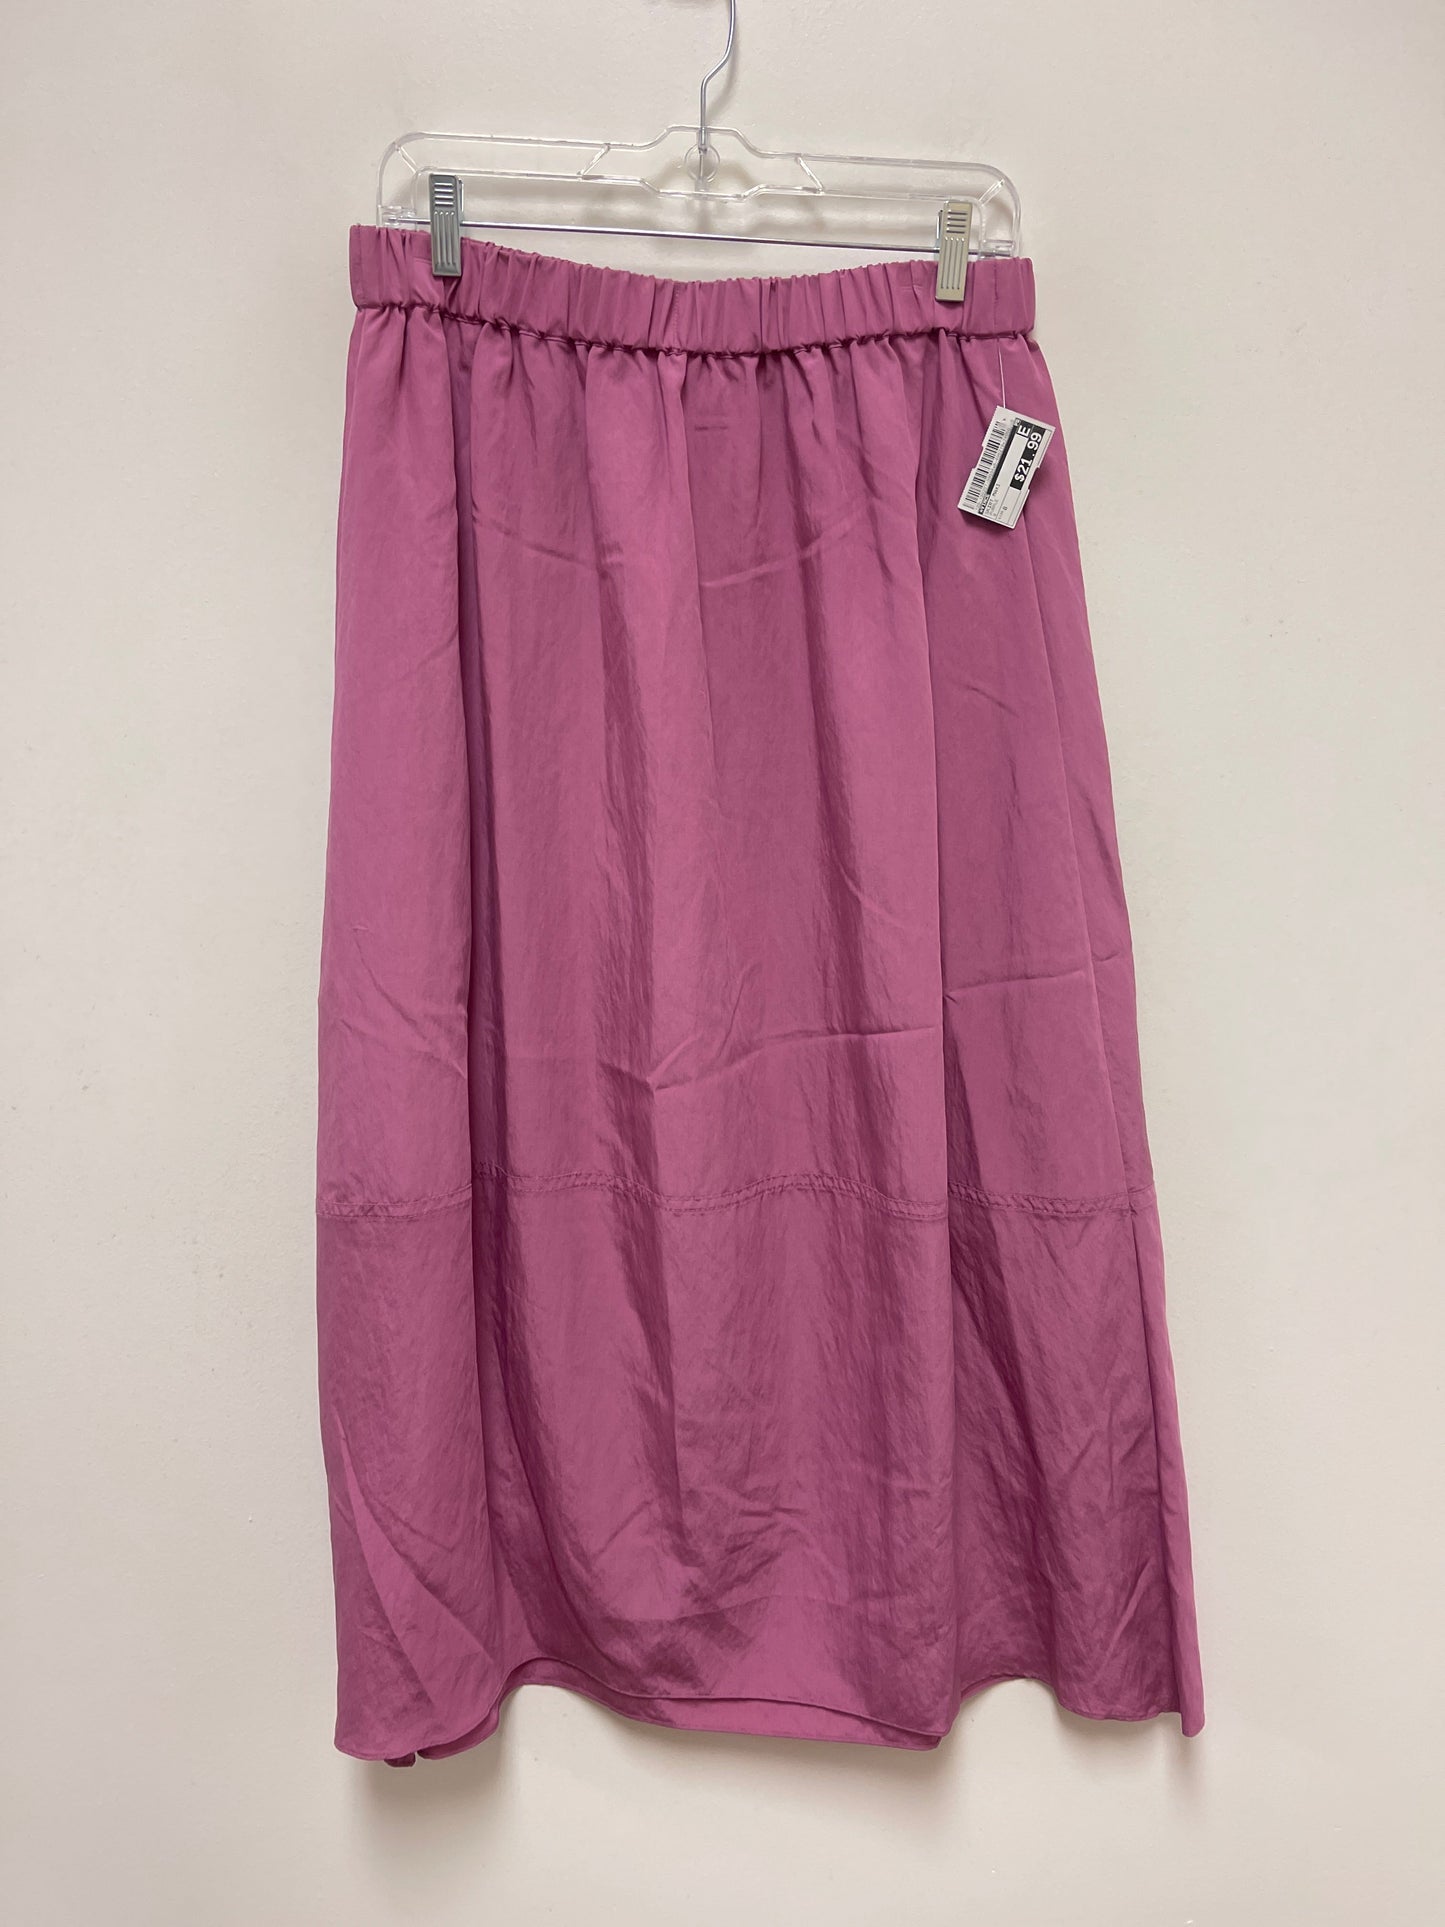 Skirt Maxi By Vince  Size: 8